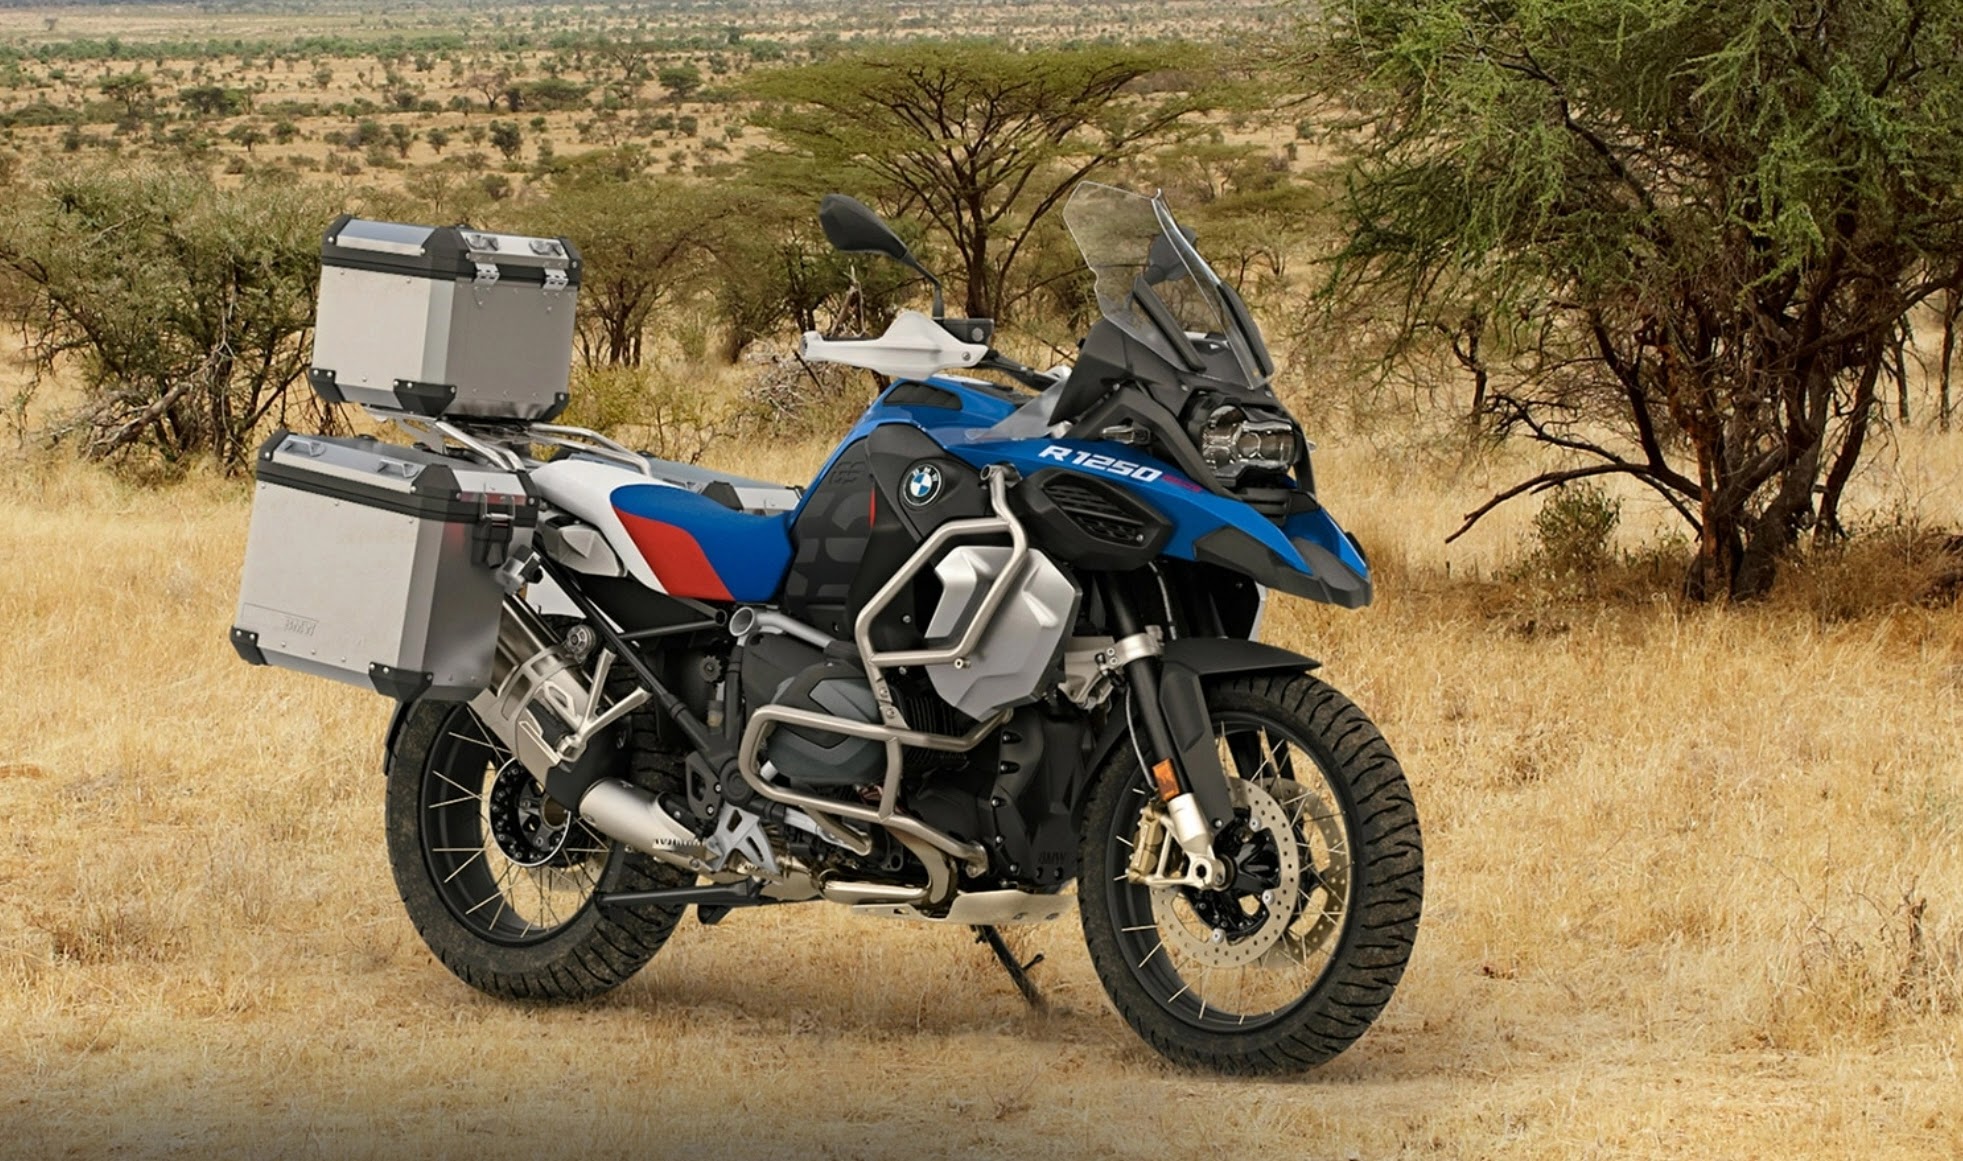 Meng Models' 1/9th Scale BMW R 1250 GS ADV Real